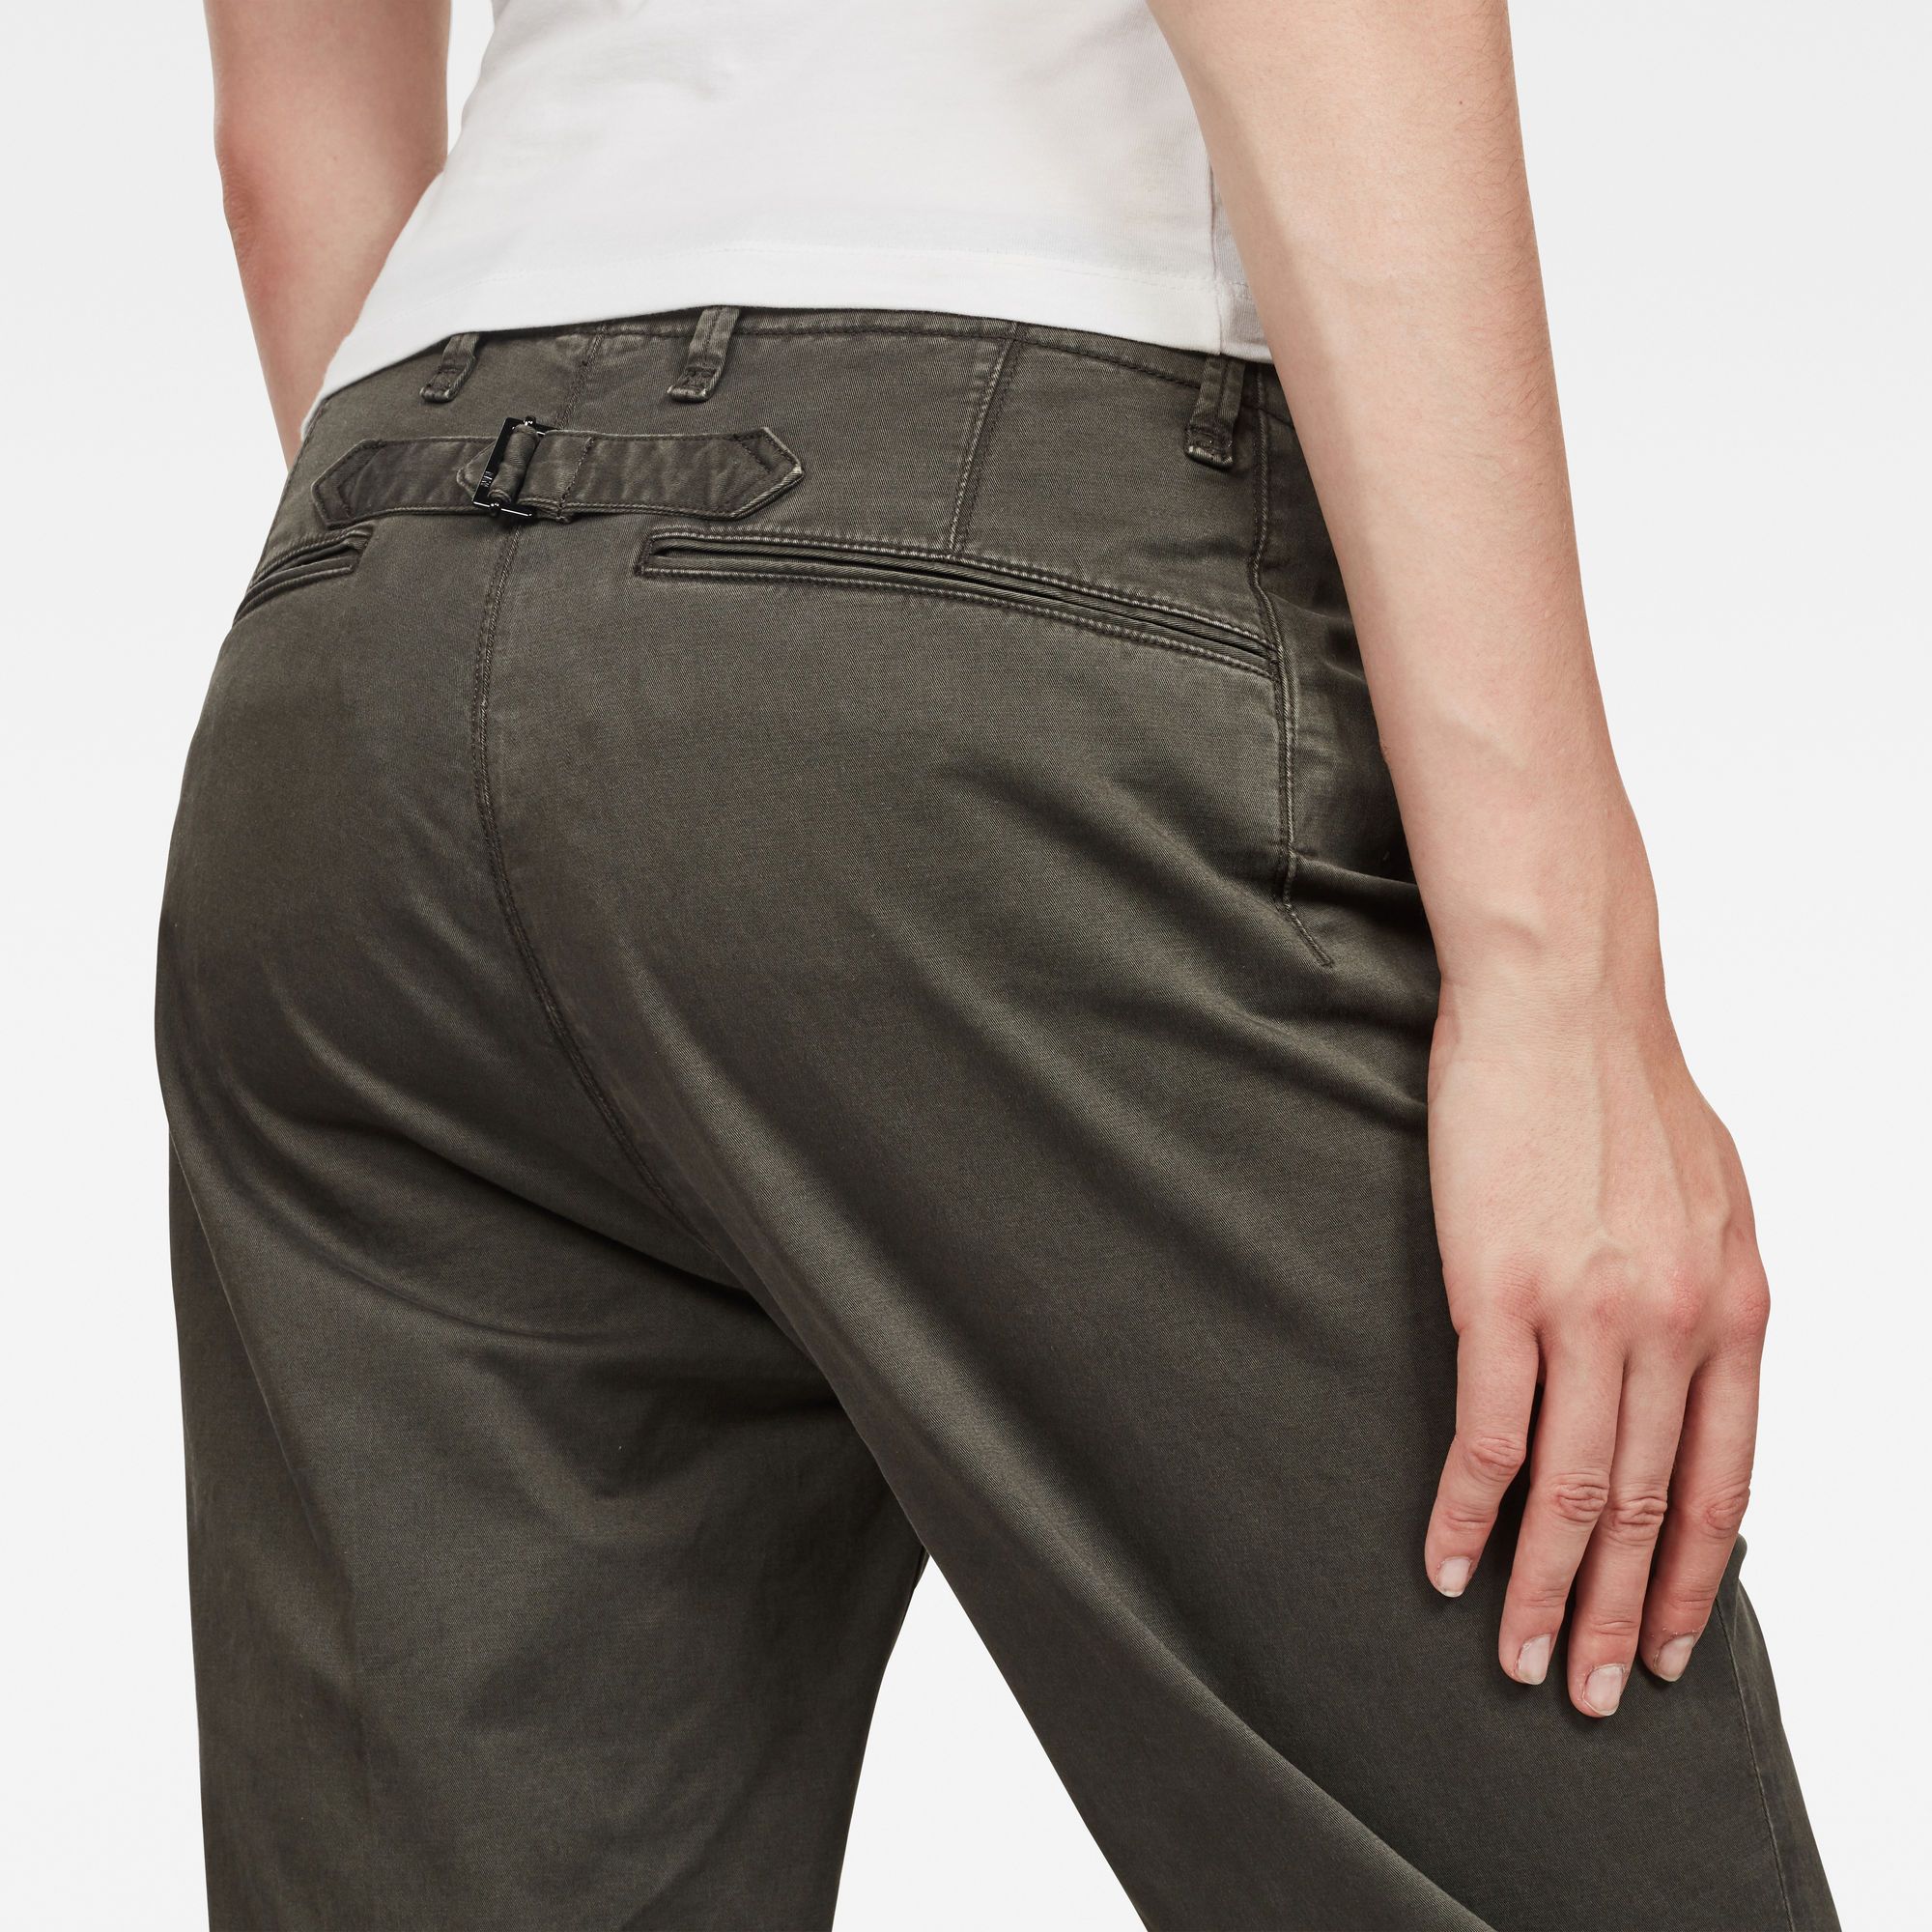 Regular waistband. Low waist. Vertical placed seaming for perfect fit. Cinch at upper back waist. Zip fly. Zip & button closure. Mid waist. The Page Ankle chino is constructed from finely woven twill with a soft hand-feel. Compact twill. Soft and comfortable with stretch. Boyfriend